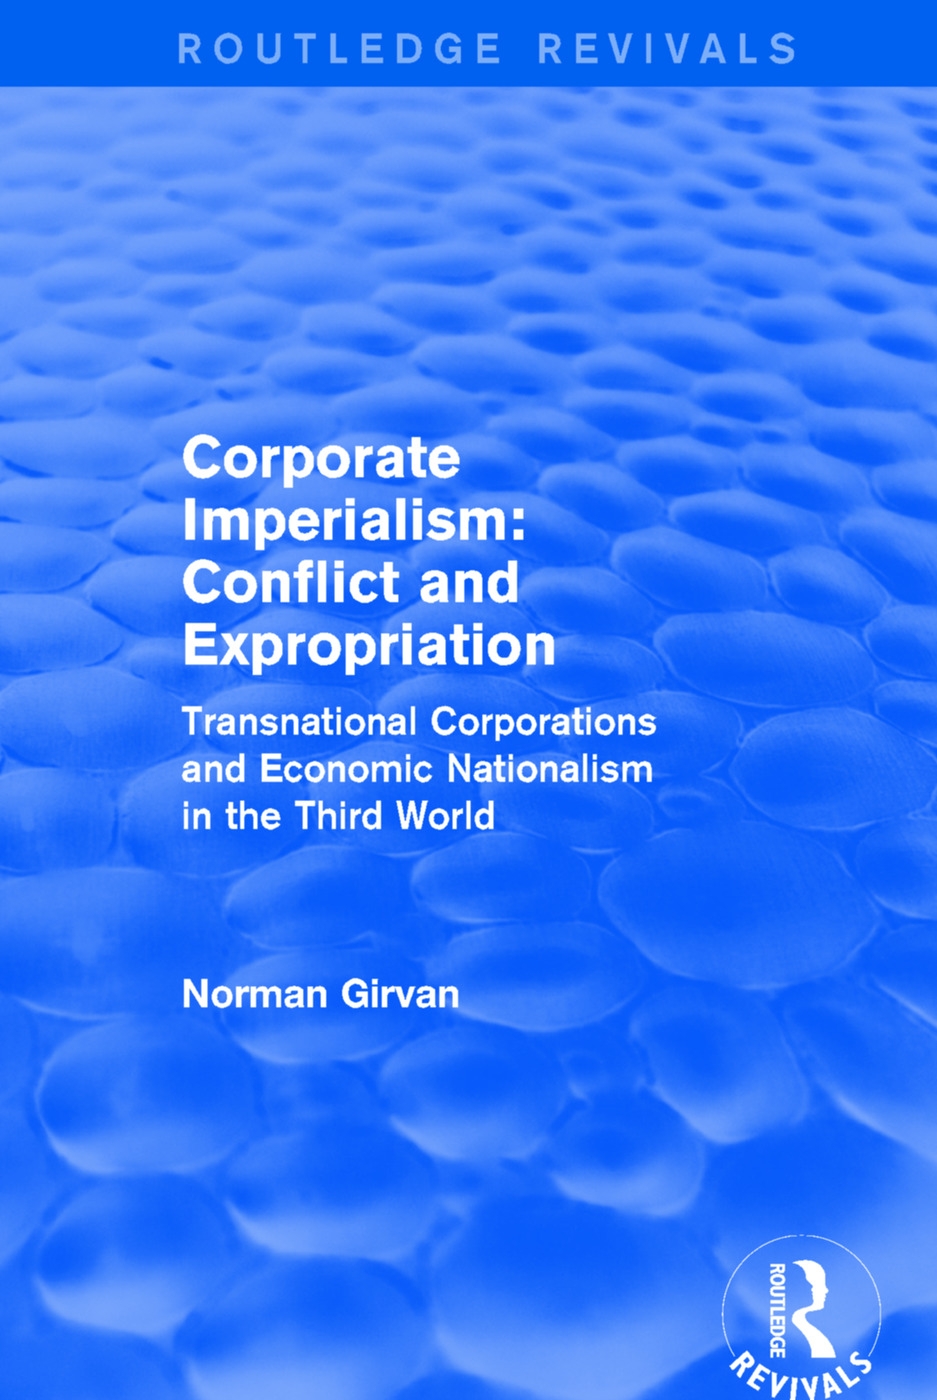 Corporate Imperialism: Conflict and Expropriation: Conflict and Expropriation